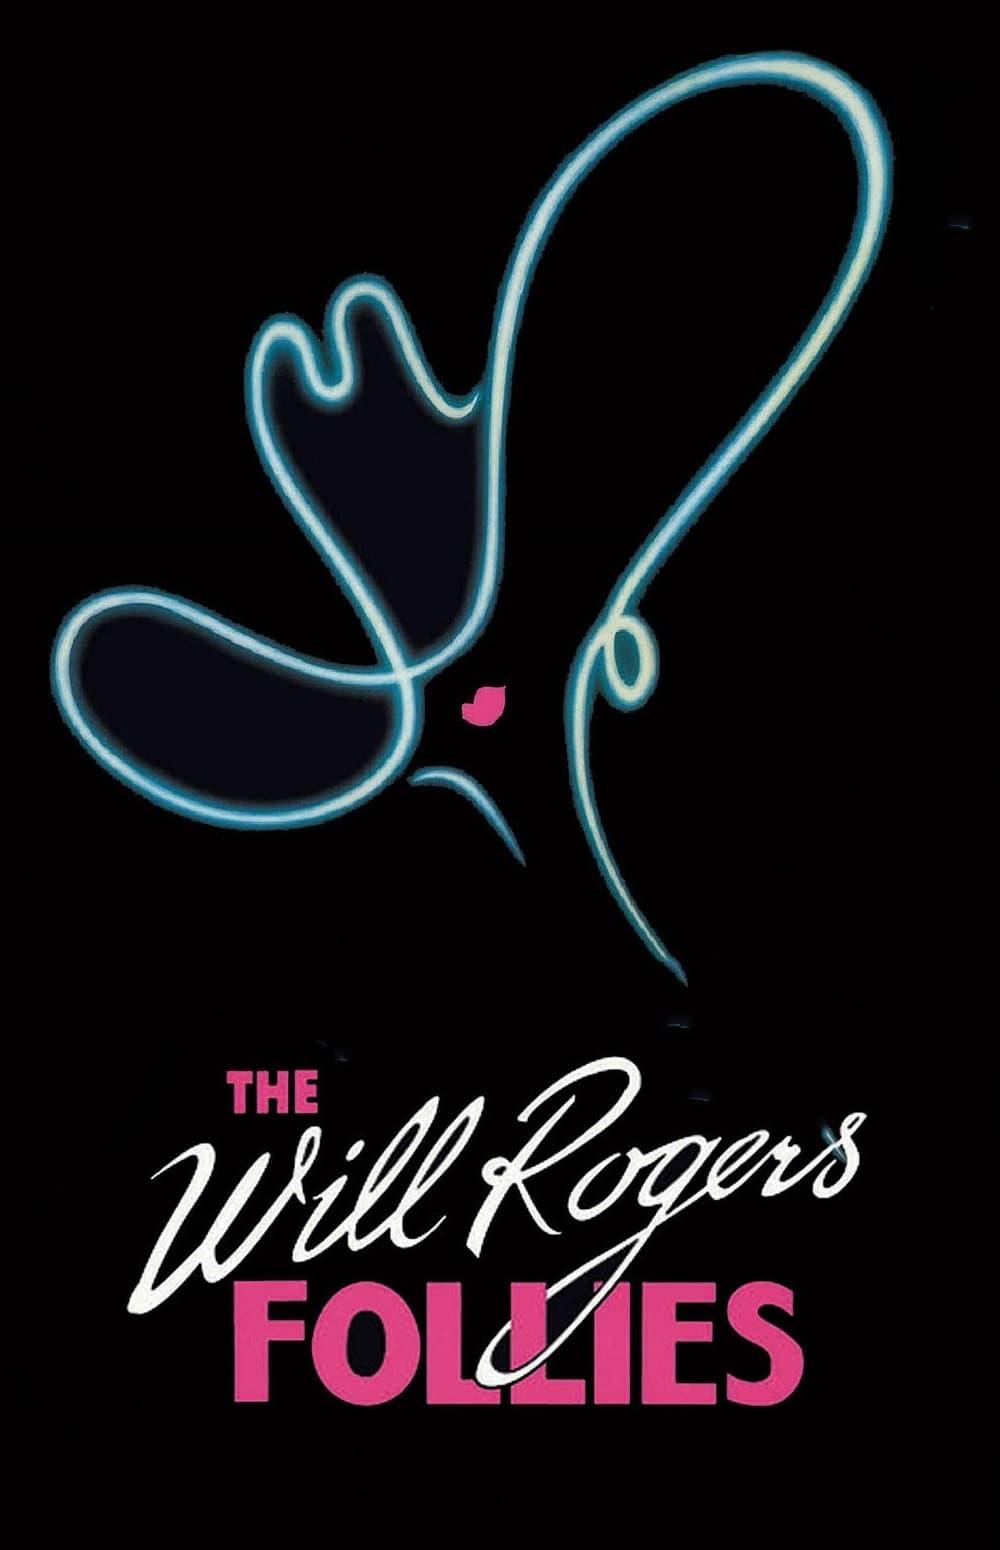 The Will Rogers Follies: A Life In Revue poster